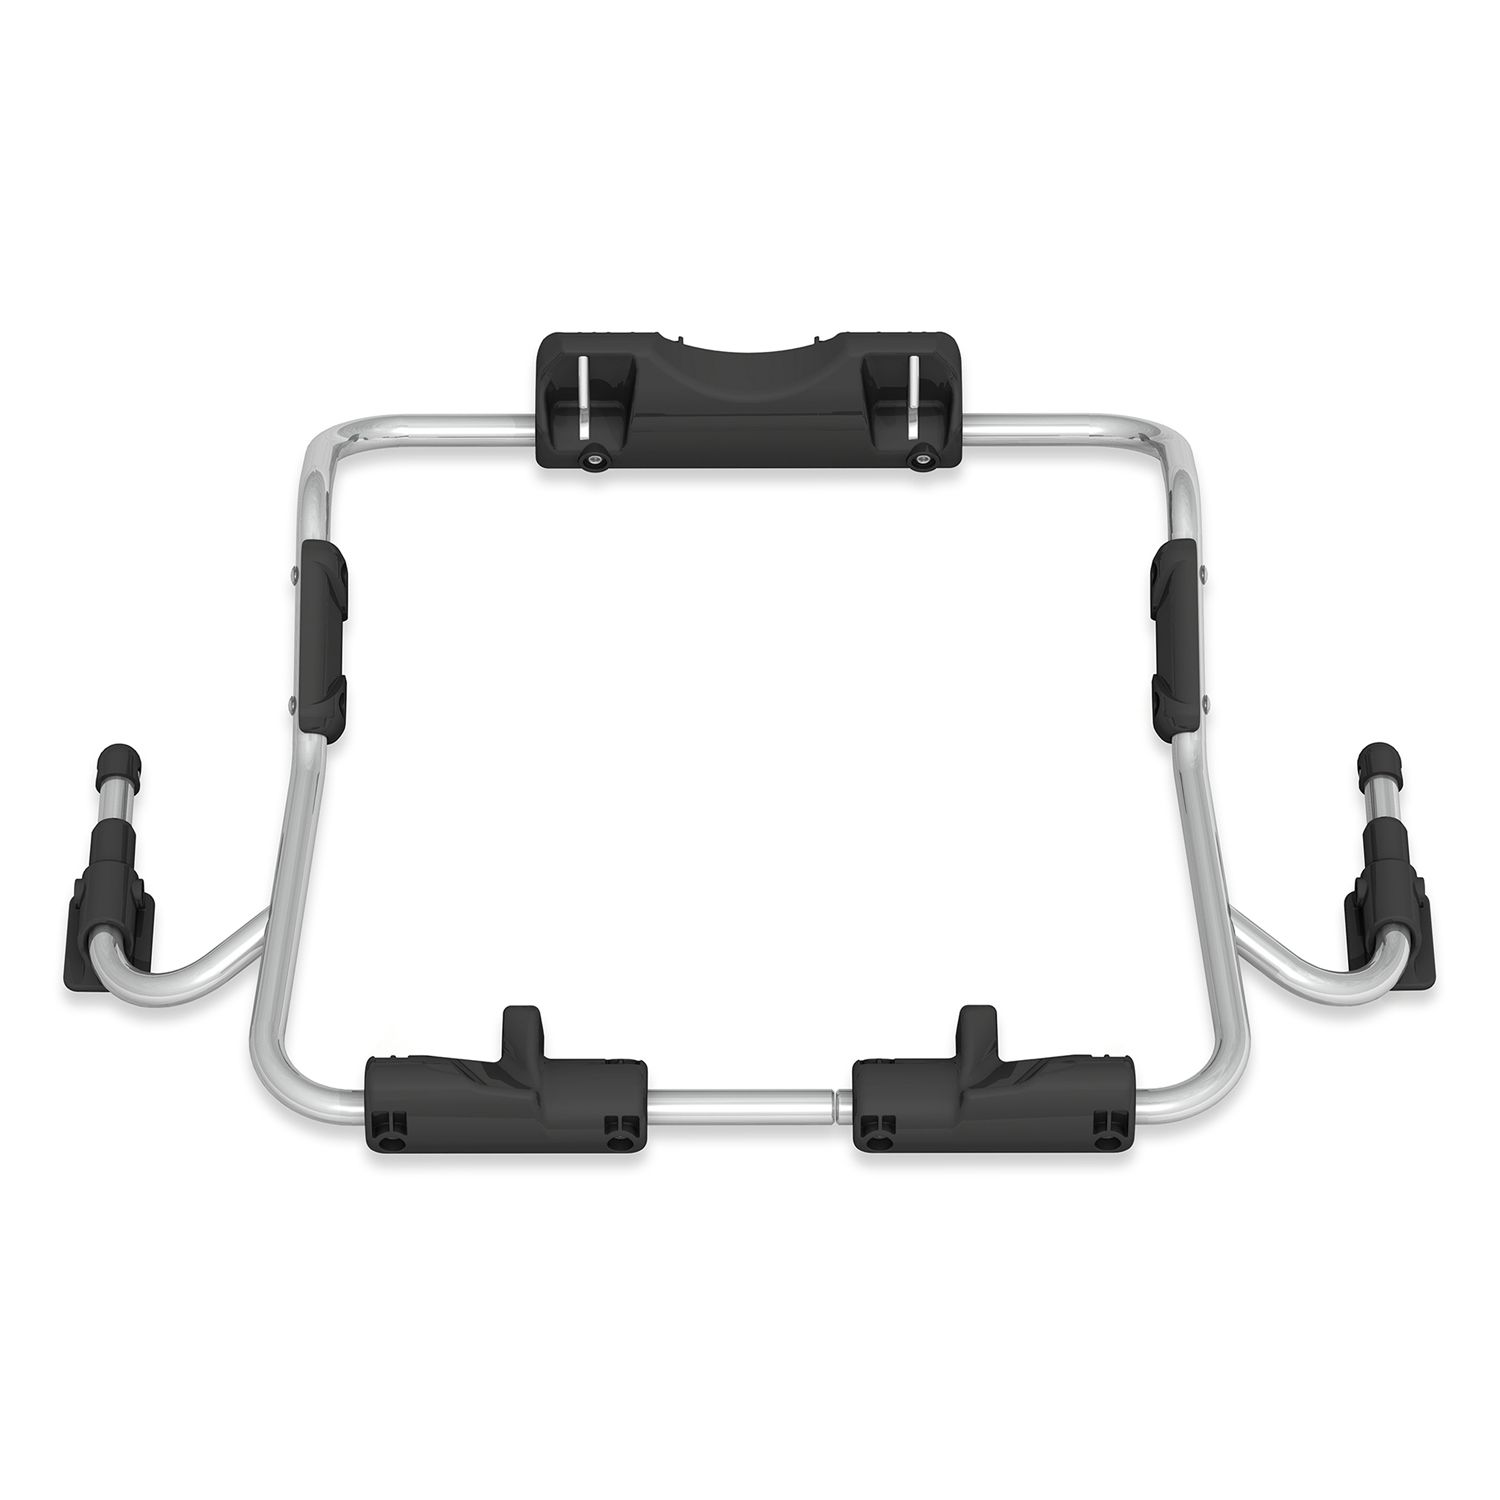 2016 duallie infant car seat adapter for graco